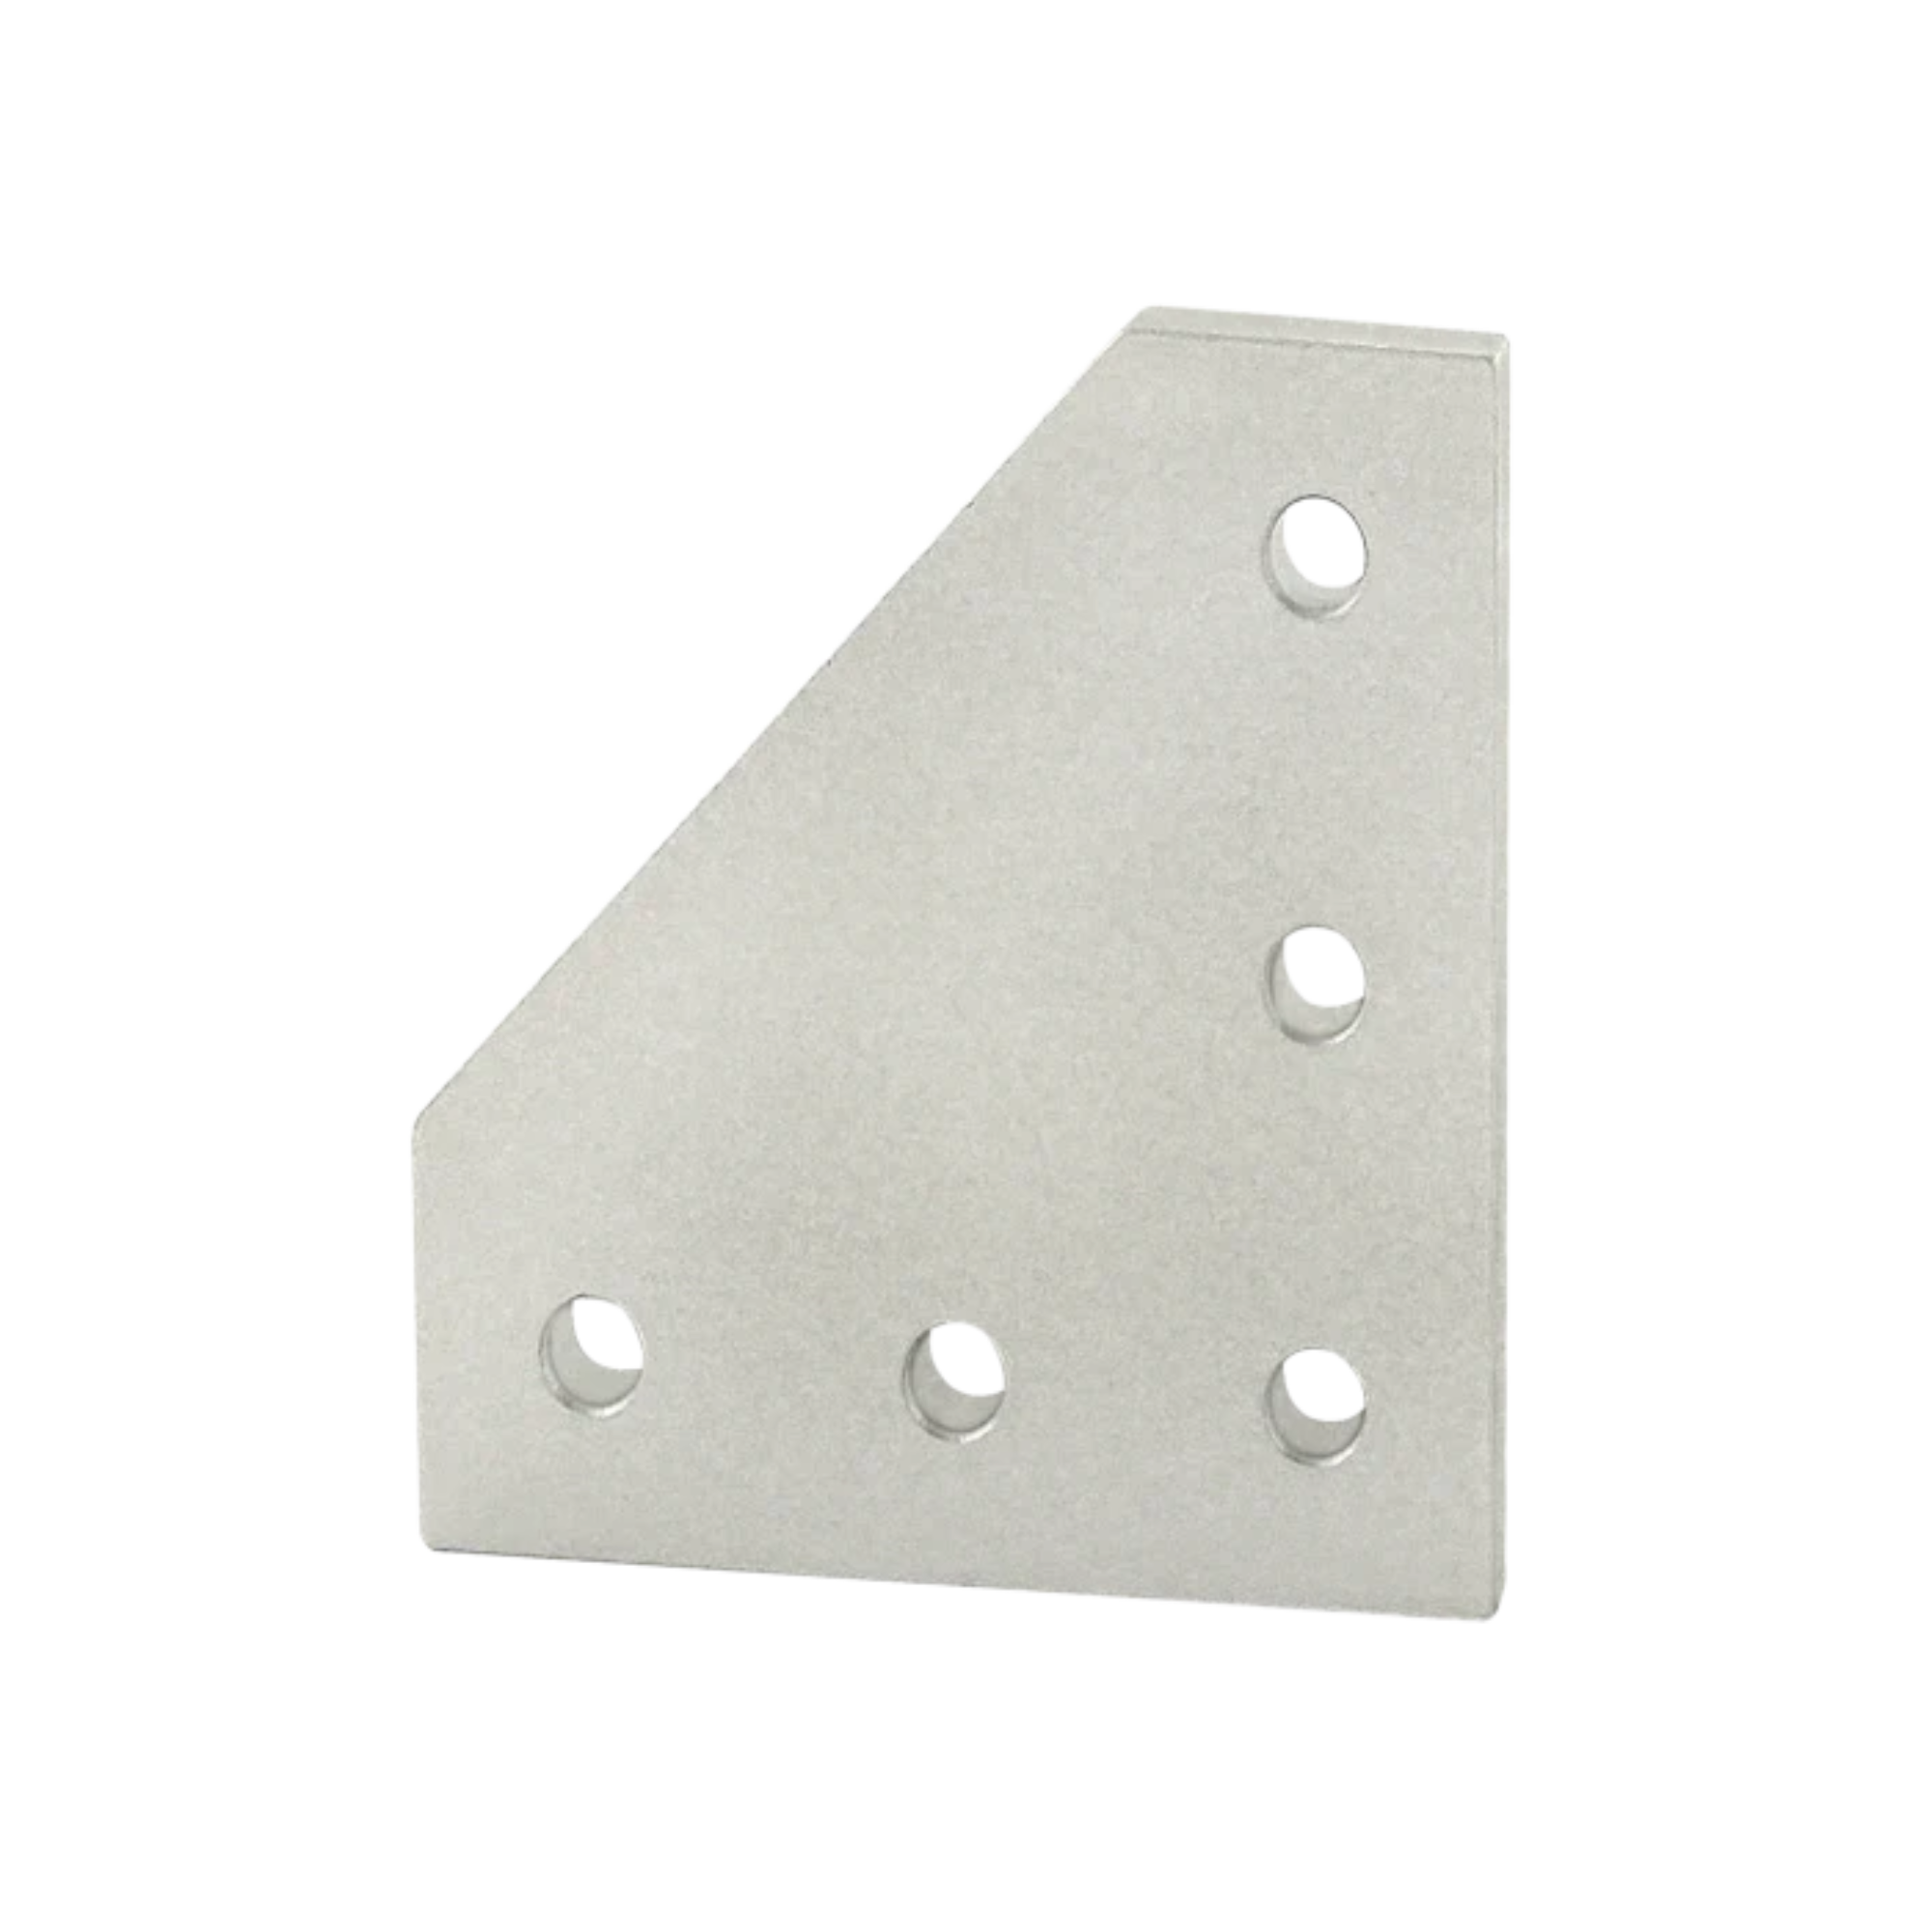 side view of a flat, rectangular mounting plate with five holes and an angled top left corner